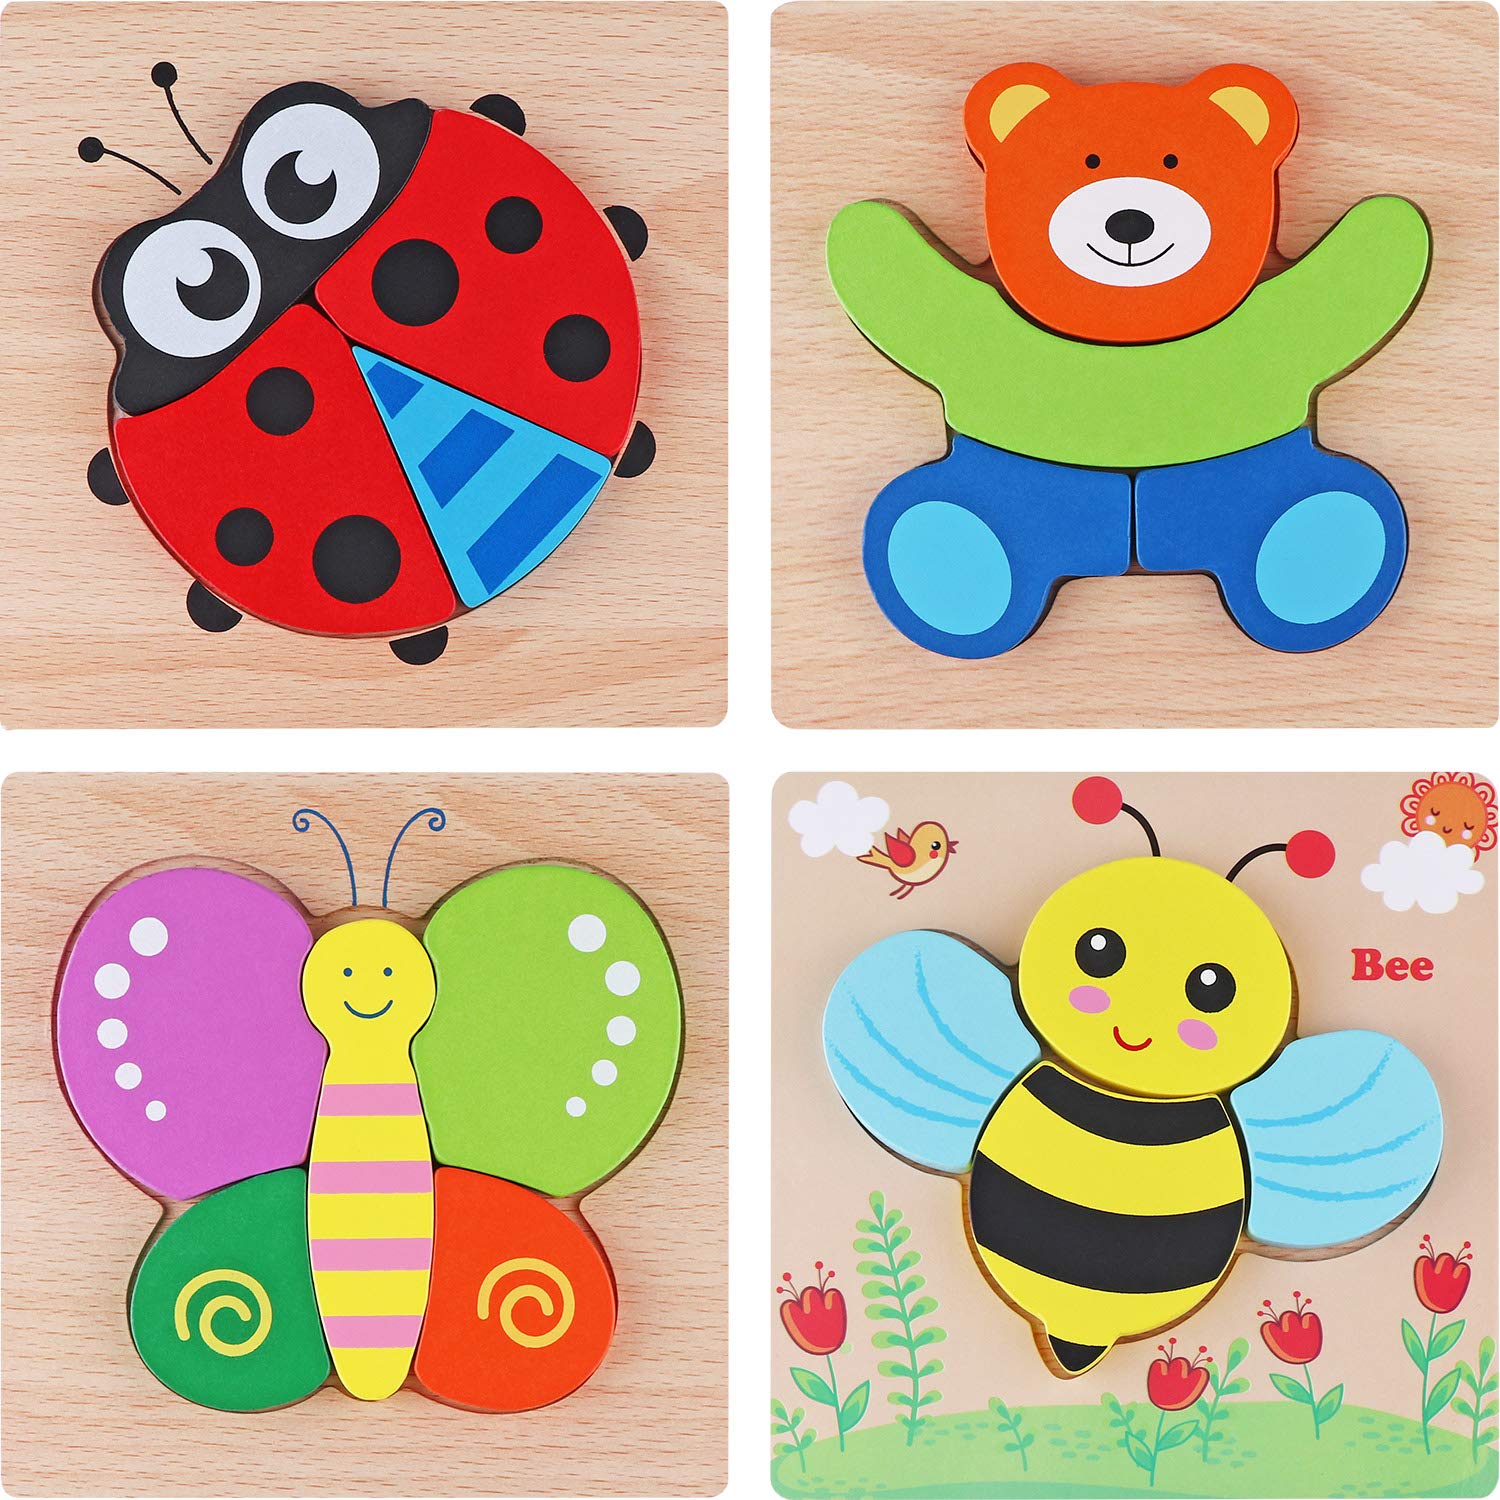 Tinabless Wooden Animal Jigsaw Puzzles